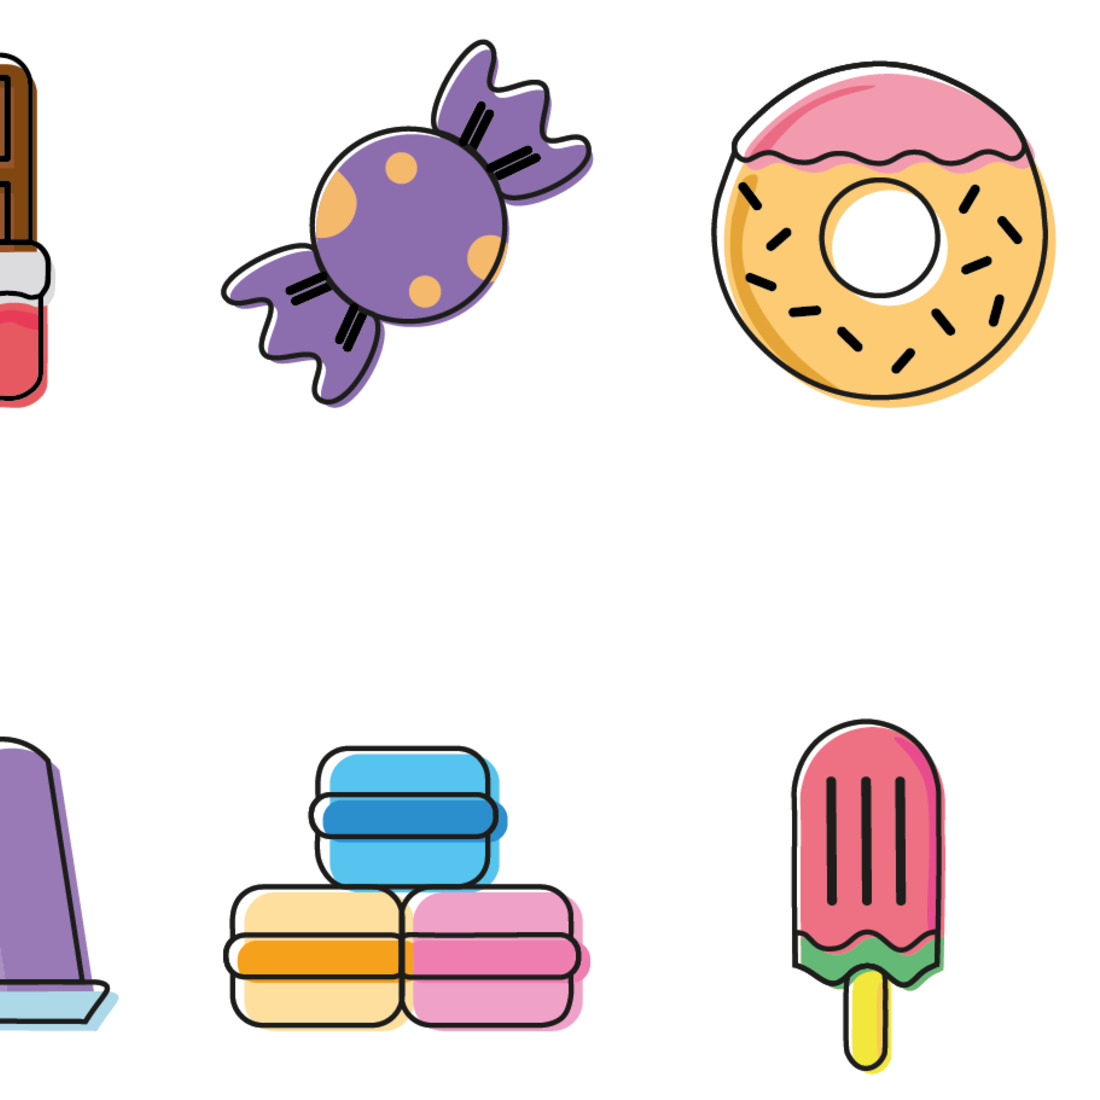 10 Food Line Icons cover image.